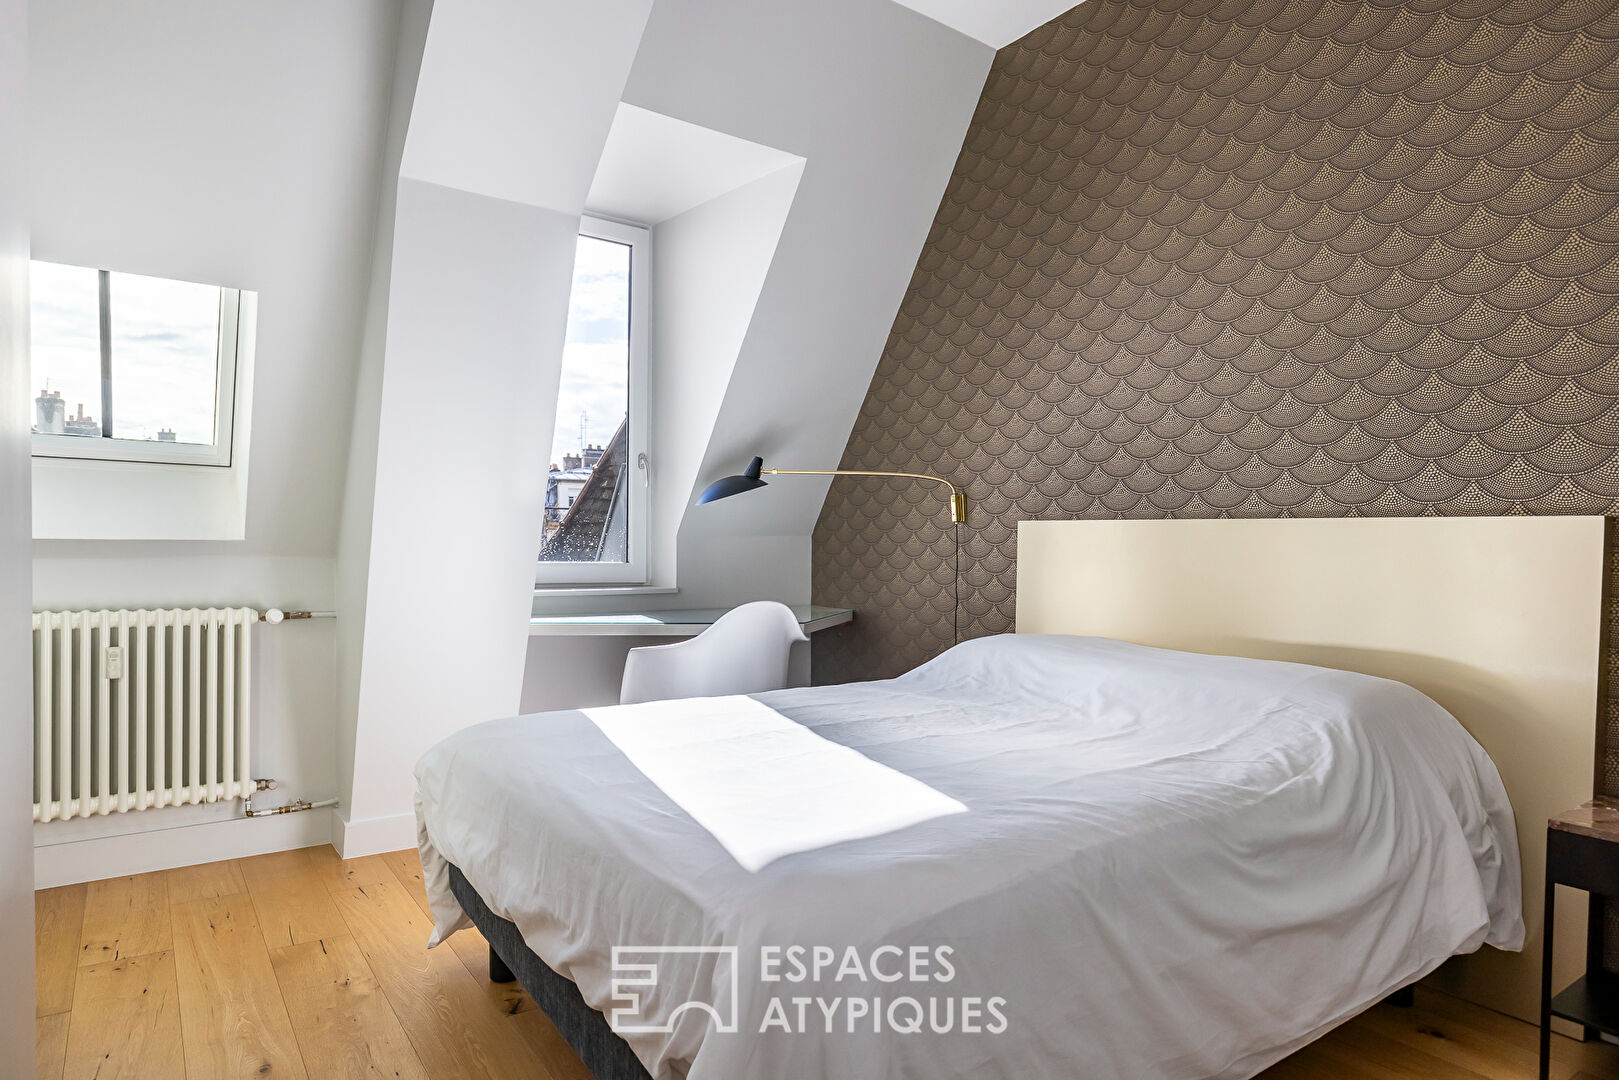 Duplex with 3 bedrooms in the heart of the historic center of Dijon